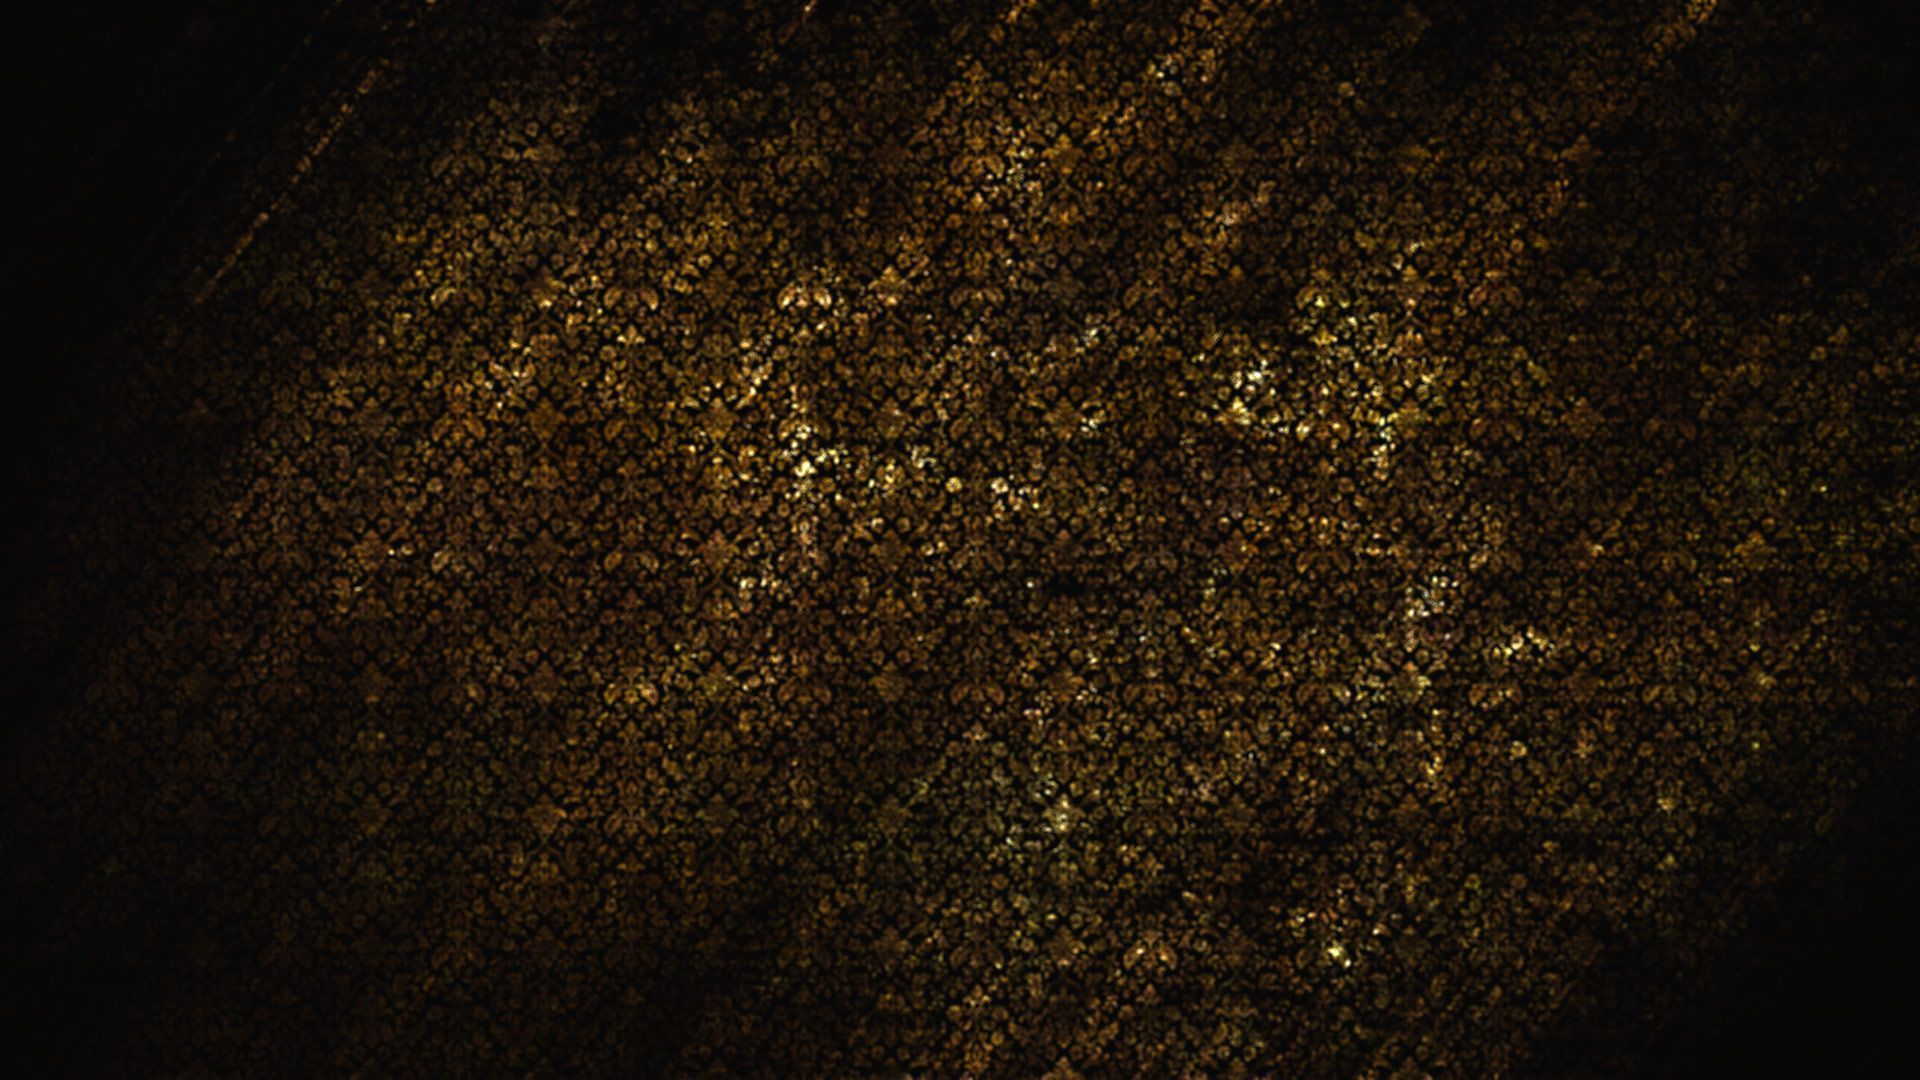 Black and Gold Wallpaper Designs